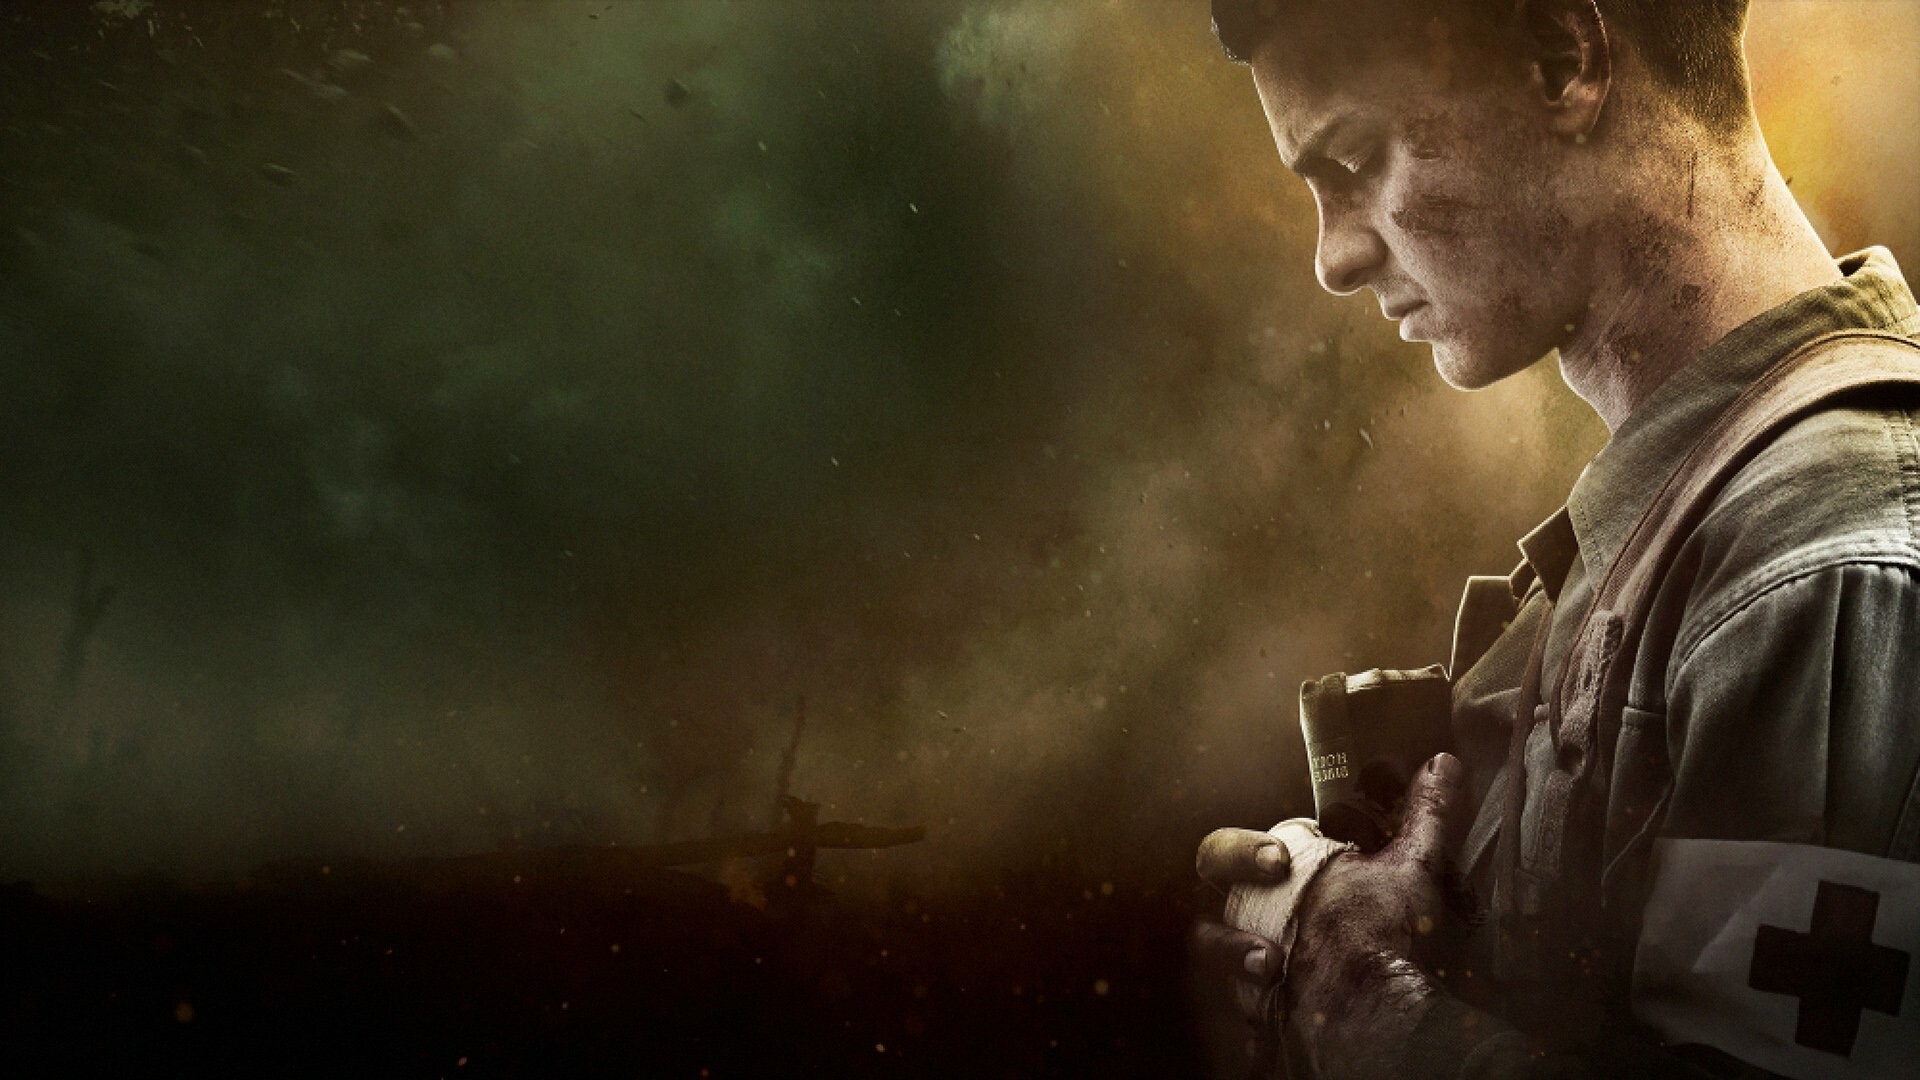 Hacksaw Ridge: Desmond Doss, a United States Army corporal who served as a combat medic. 1920x1080 Full HD Background.